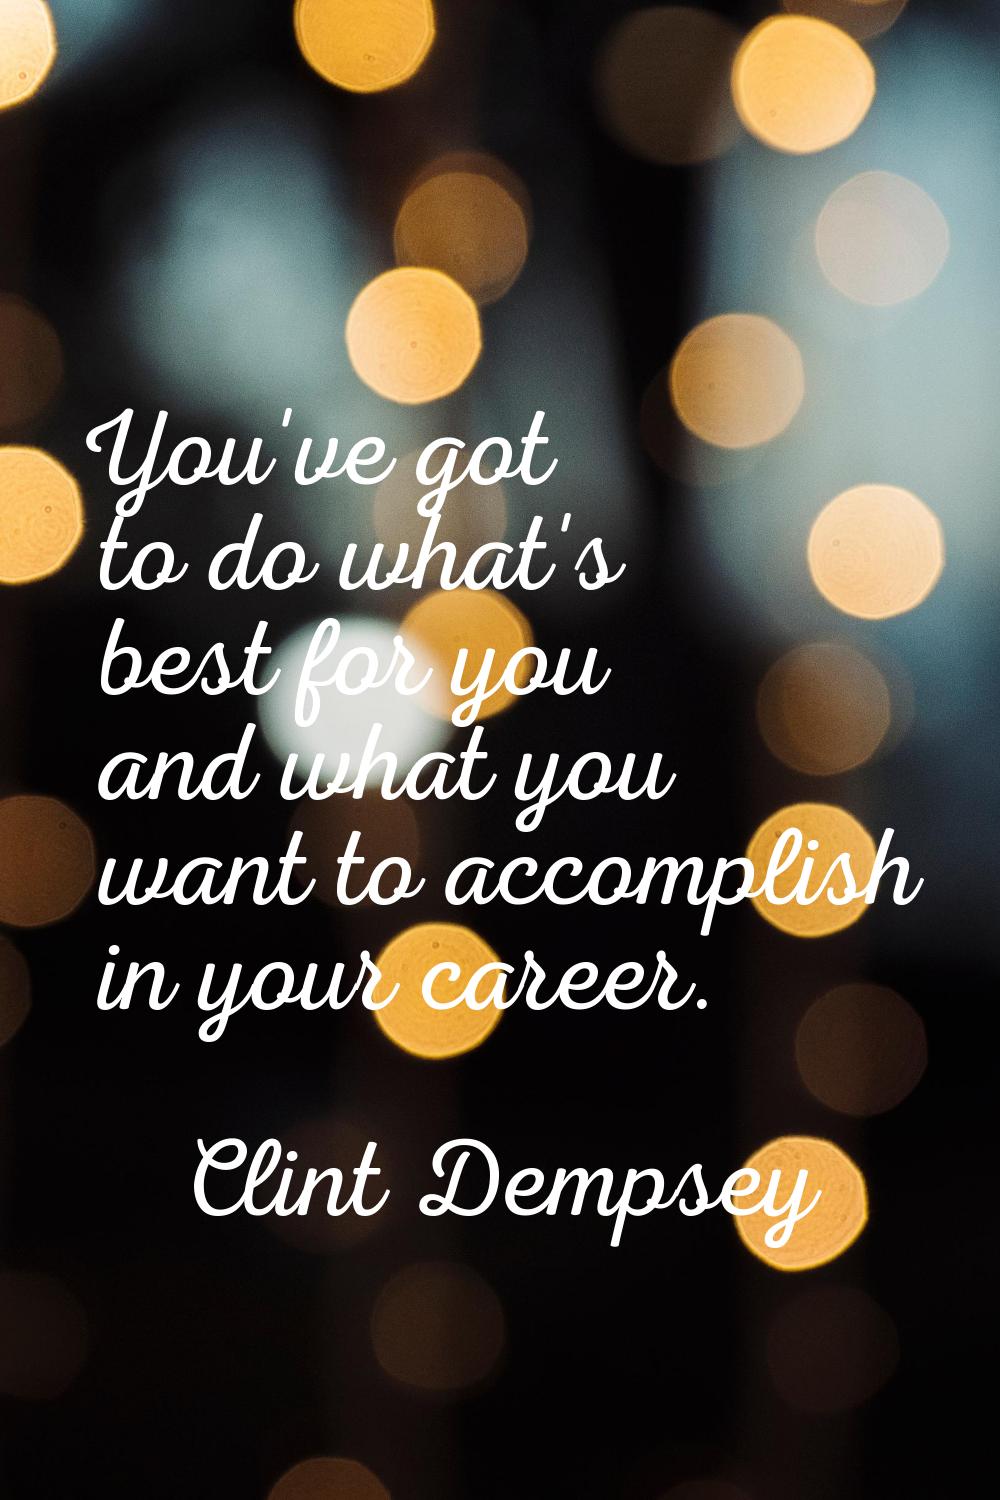 You've got to do what's best for you and what you want to accomplish in your career.